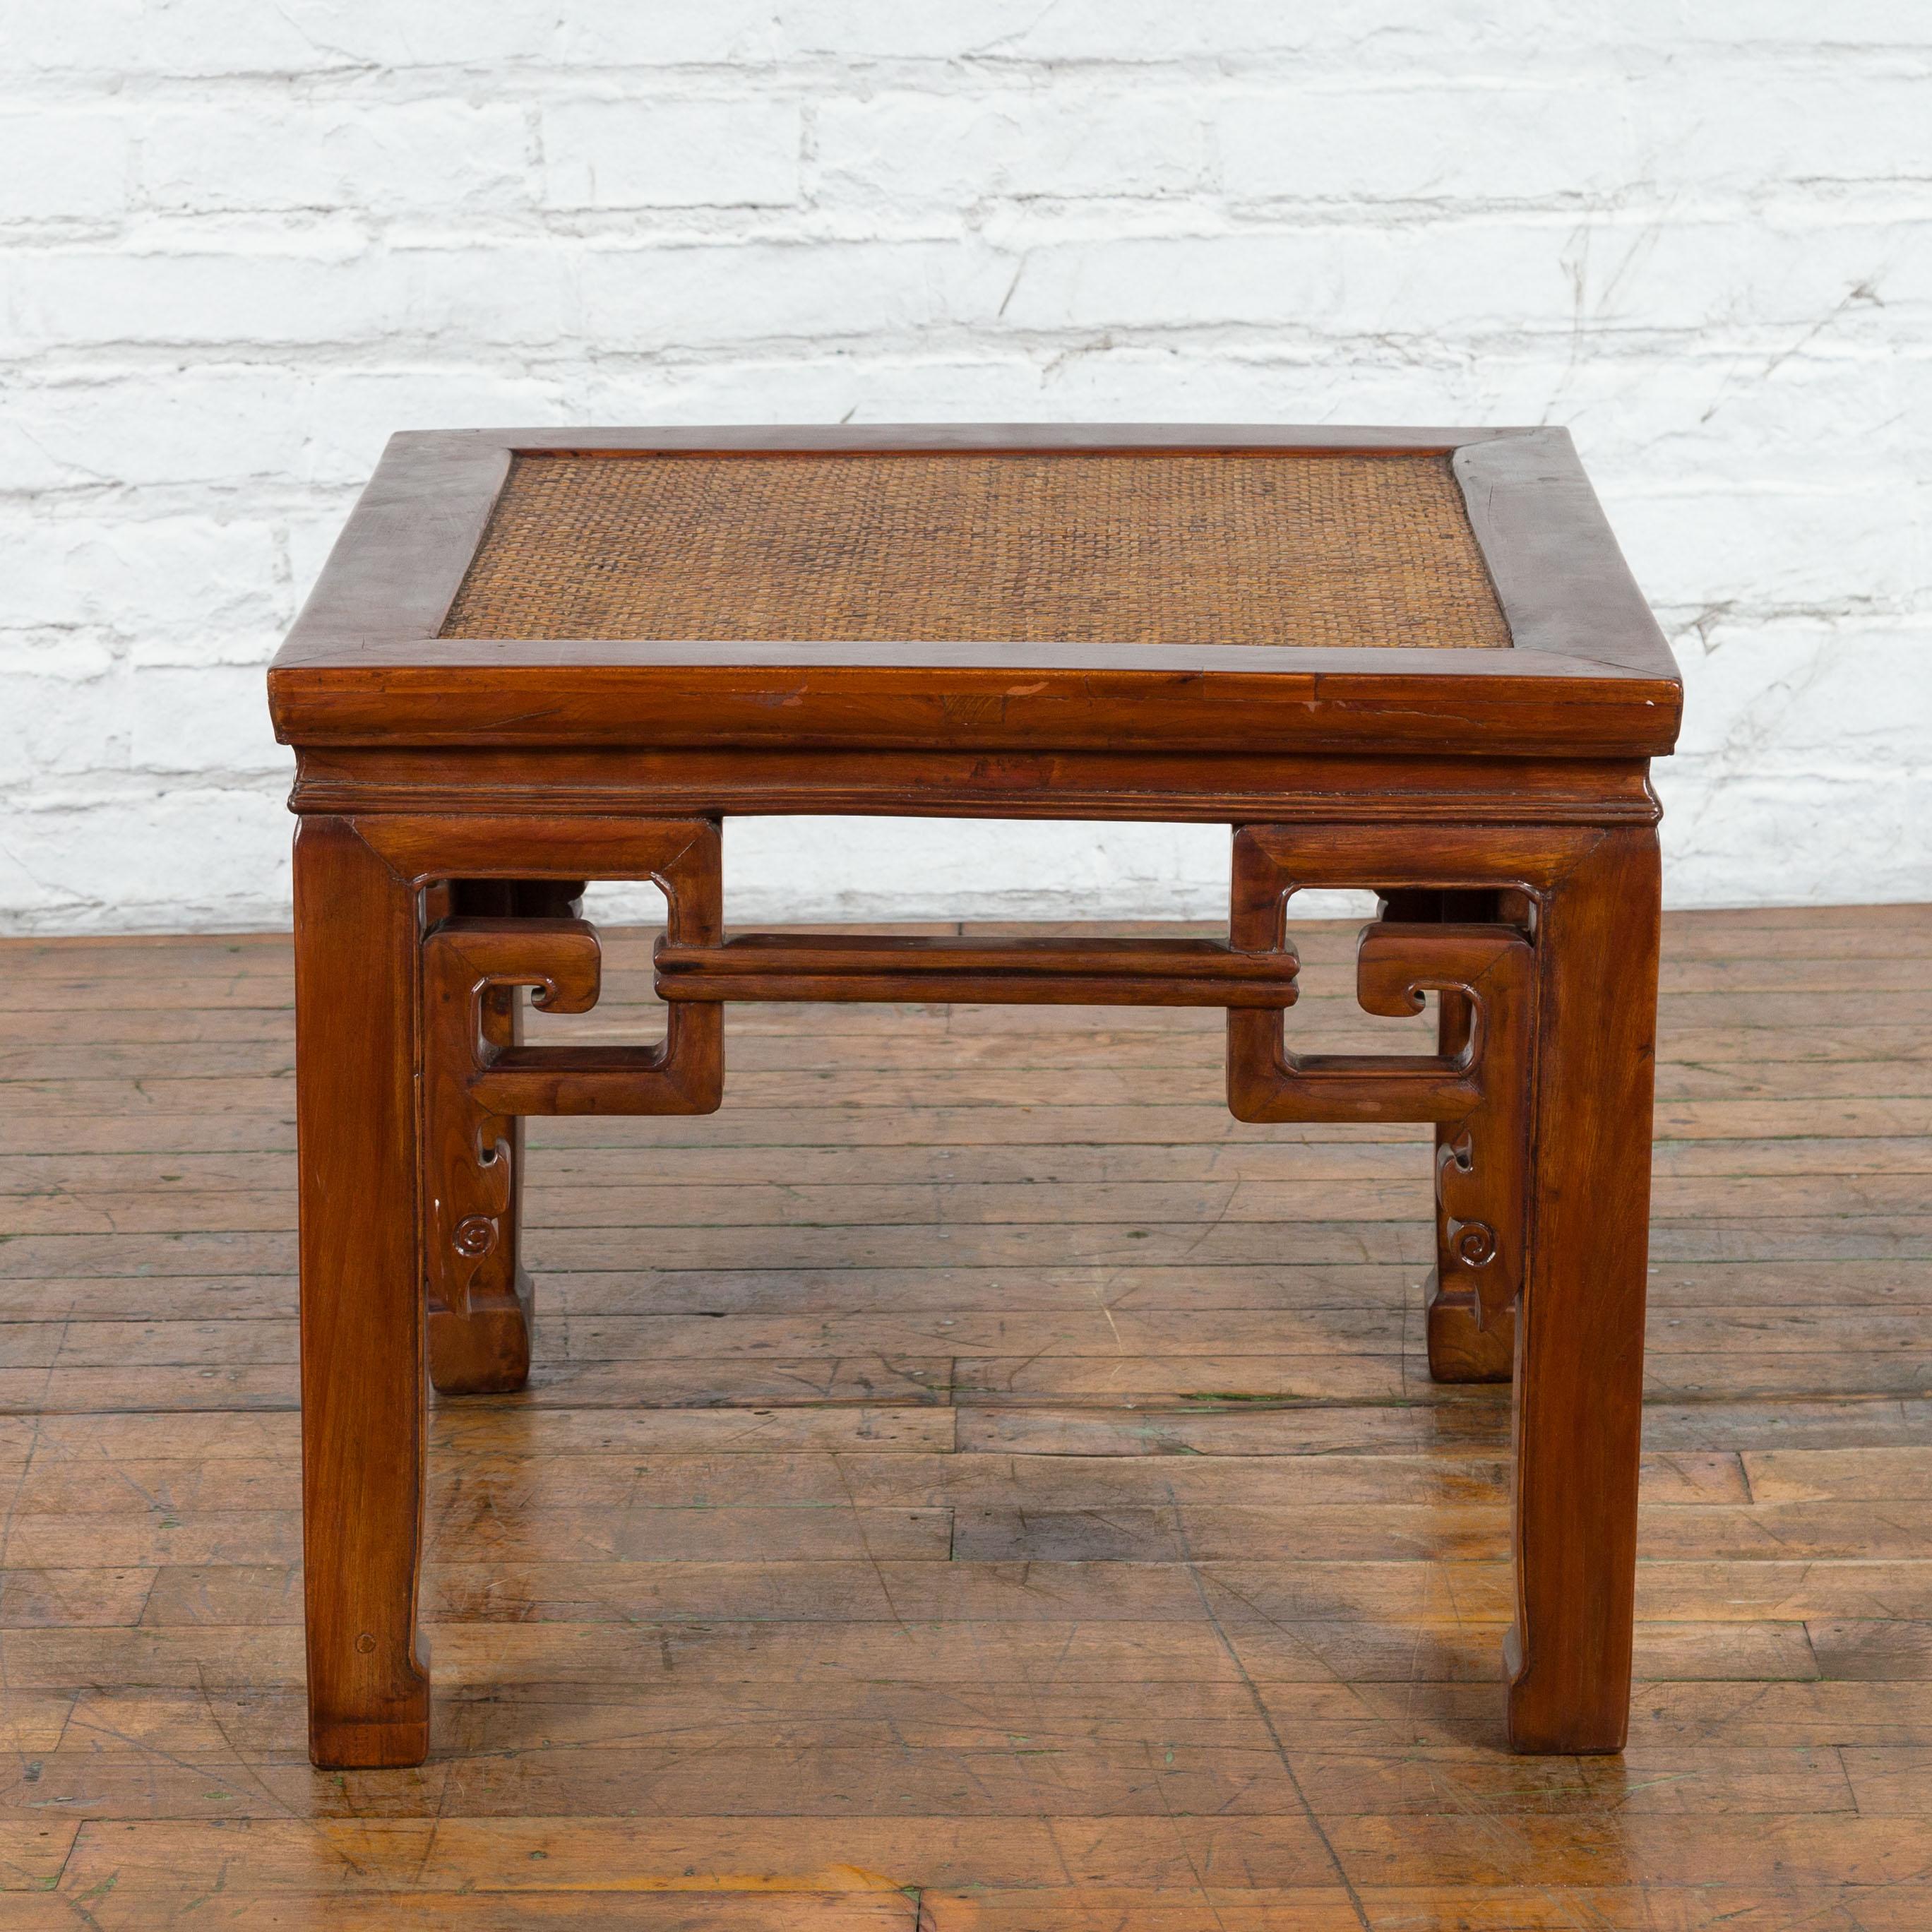 Chinese Qing Dynasty 19th Century Stool or Drinks Table with Woven Rattan Top For Sale 2